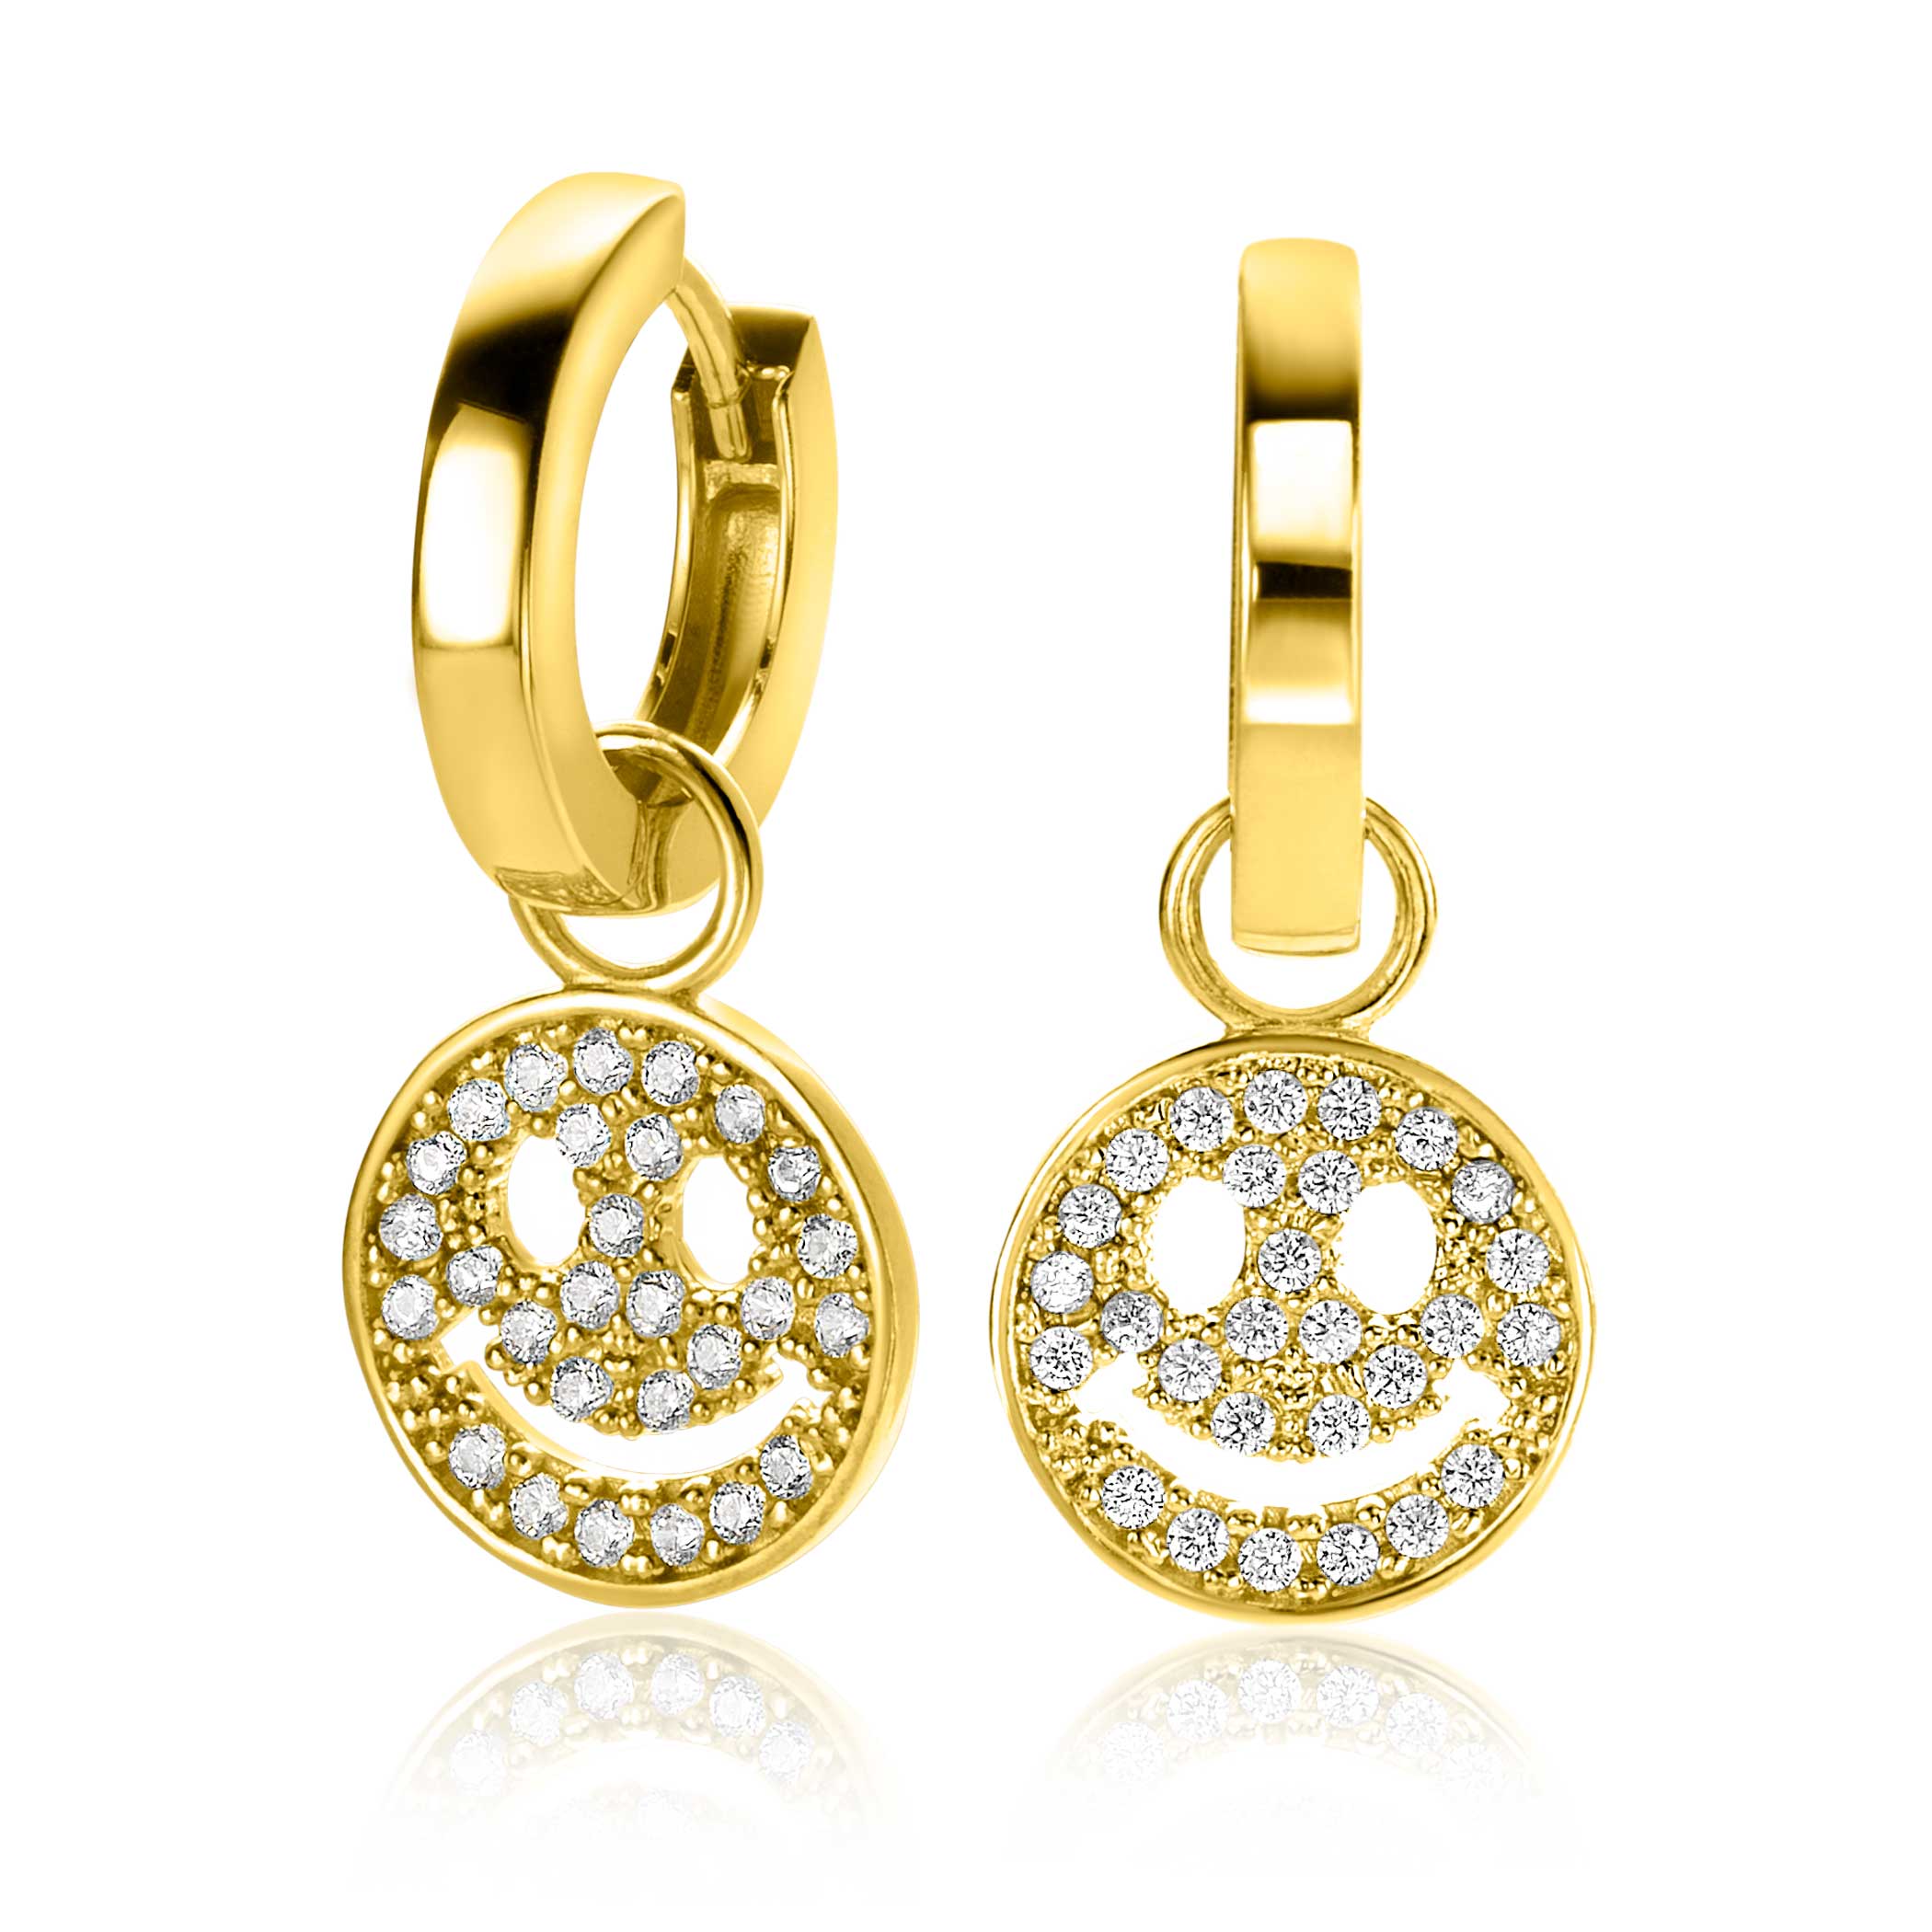 13mm ZINZI Gold Plated Sterling Silver Earrings Pendants Round Smiley Set with White Zirconias ZICH2313Y (excl. hoop earrings)